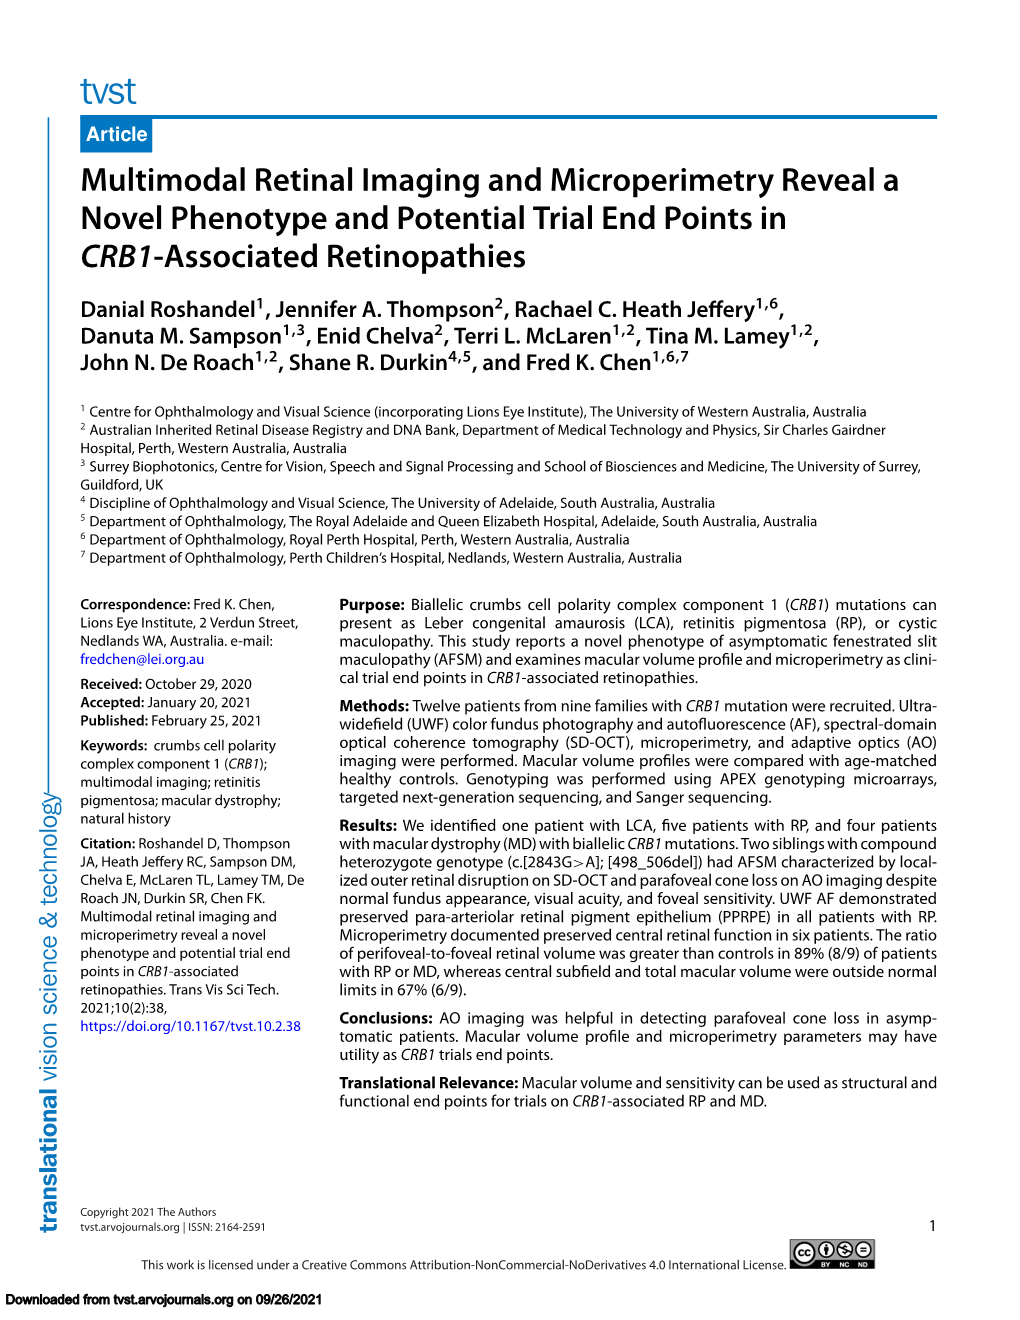 Multimodal Retinal Imaging and Microperimetry Reveal a Novel Phenotype and Potential Trial End Points in CRB1-Associated Retinopathies